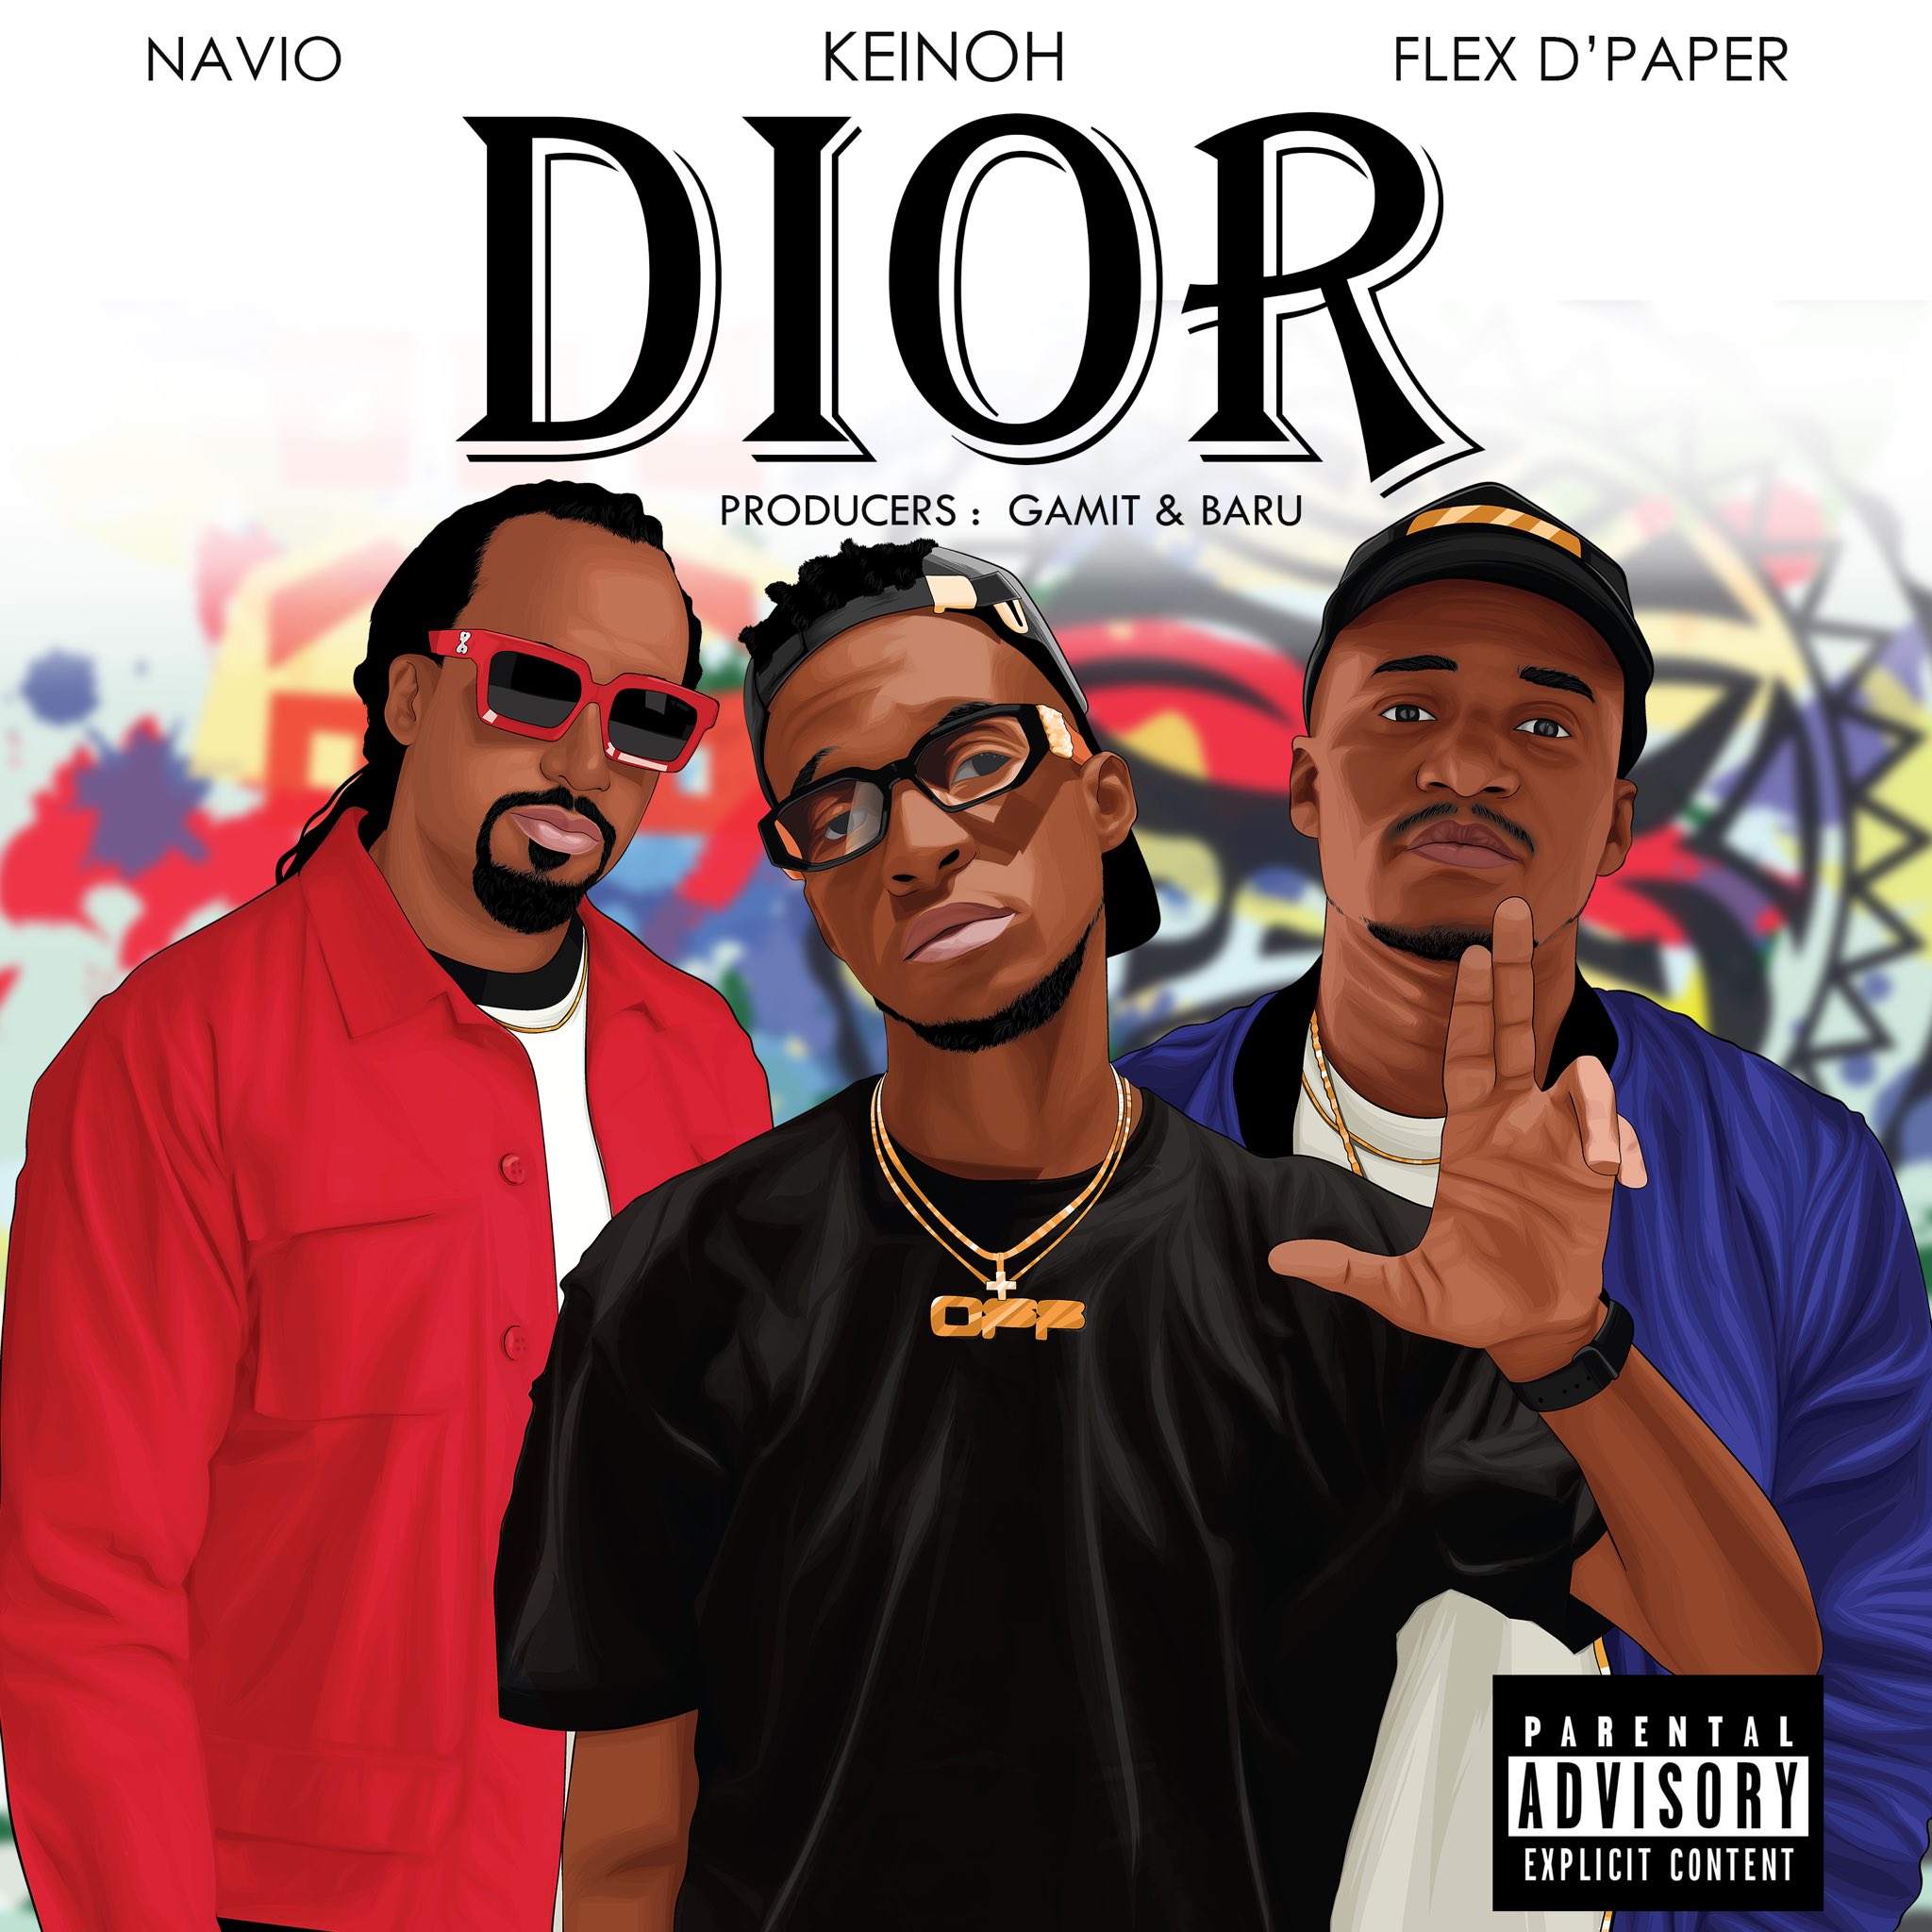 On love charged “Dior remix” Keinoh lines up Navio and Flex D’Paper